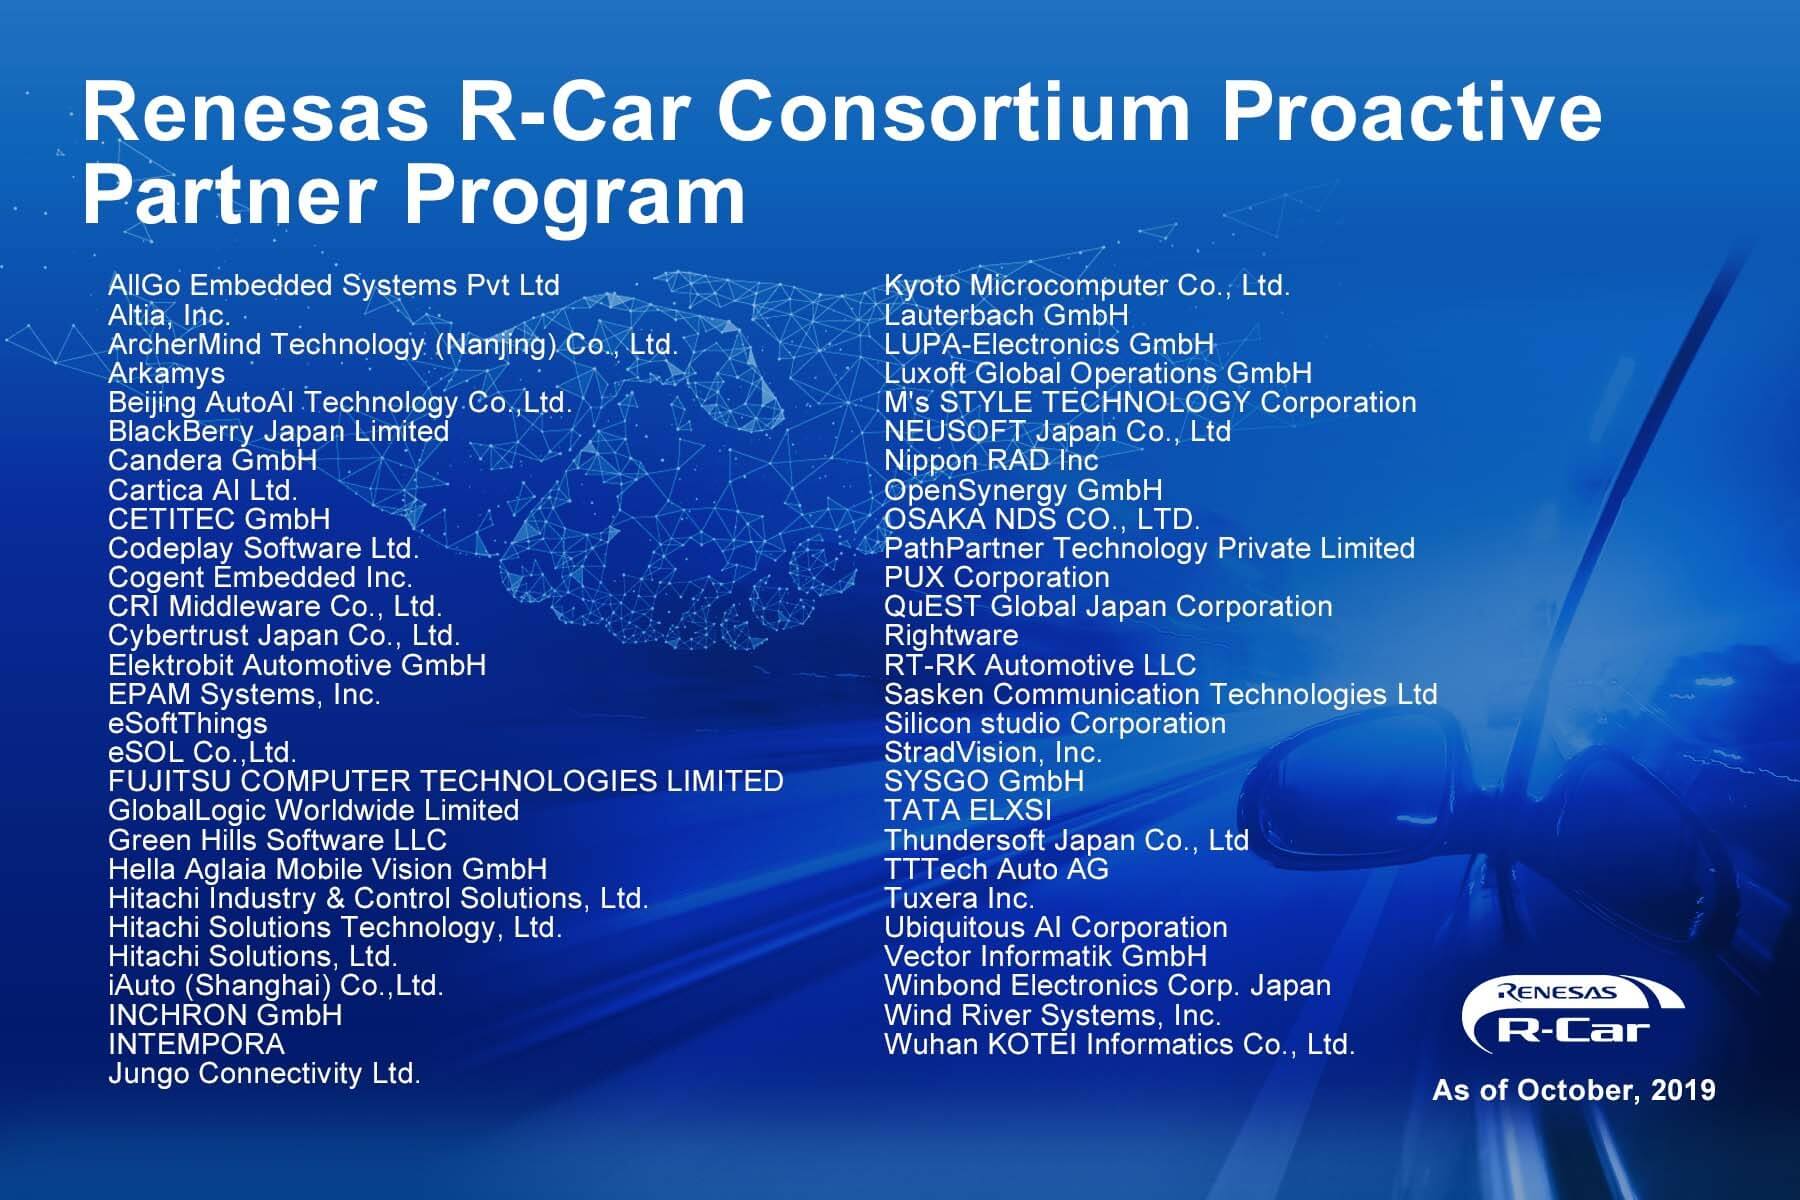 Renesas introduces the R-Car Consortium Proactive Partner Program to accelerate automotive mobility innovation-SemiMedia